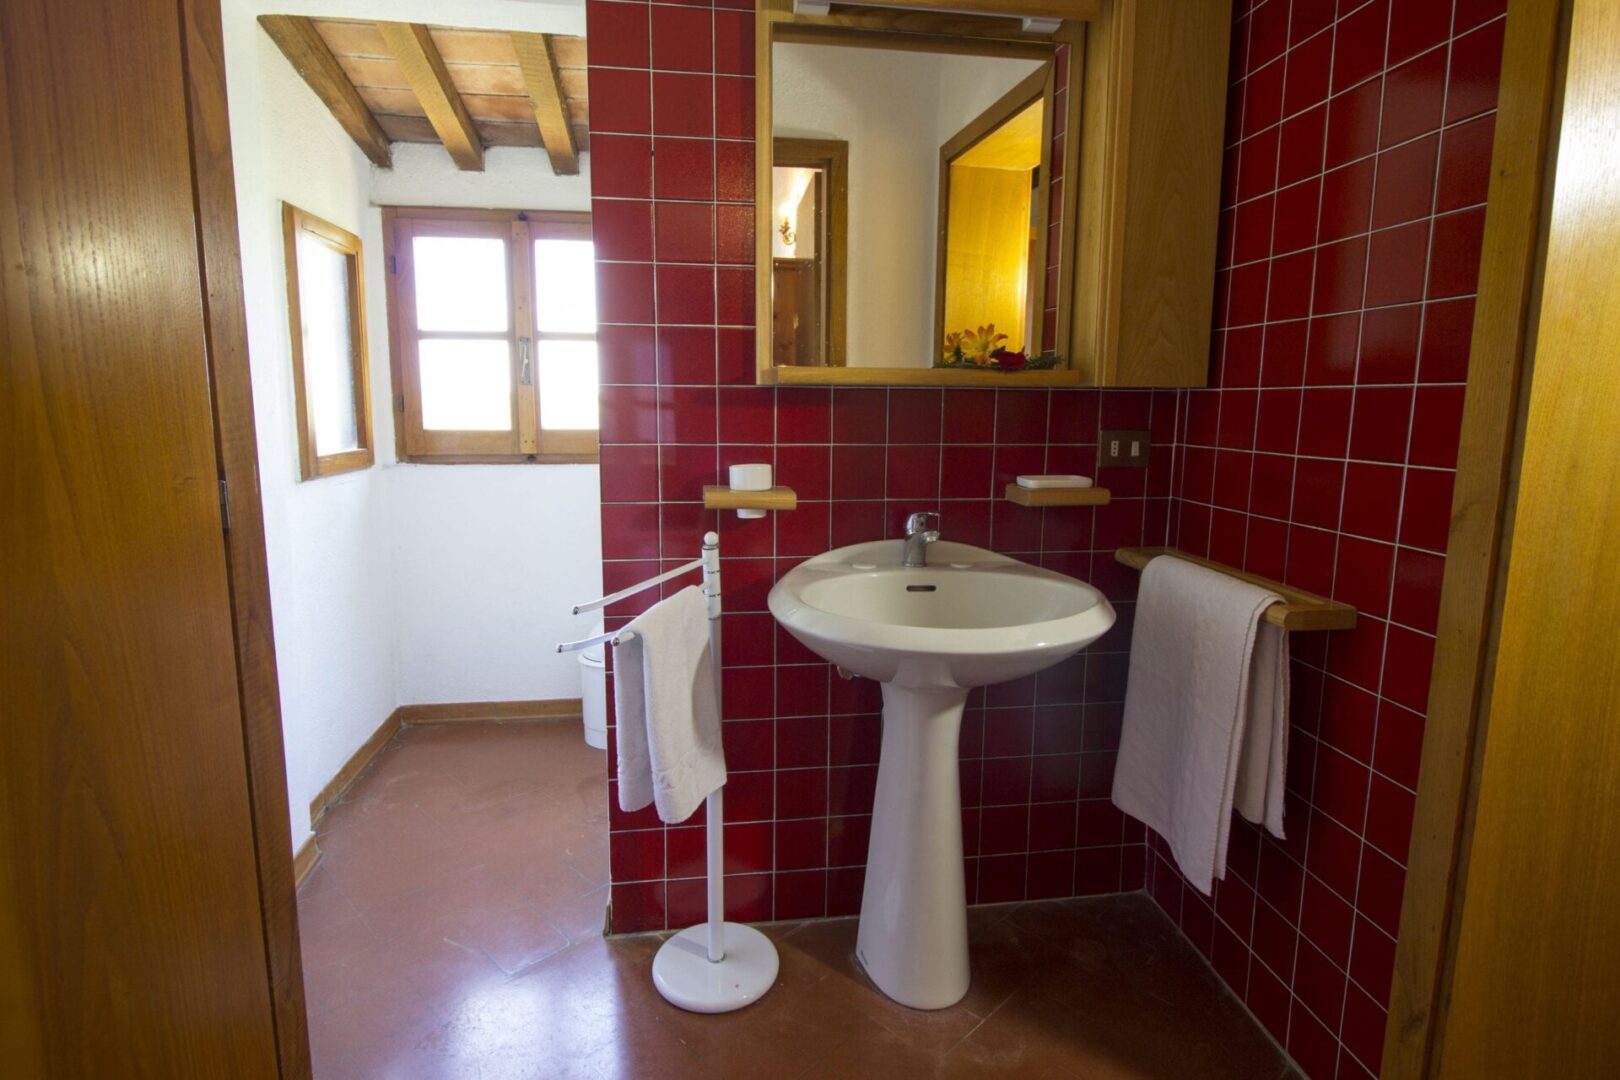 A bathroom with red tile and white fixtures.